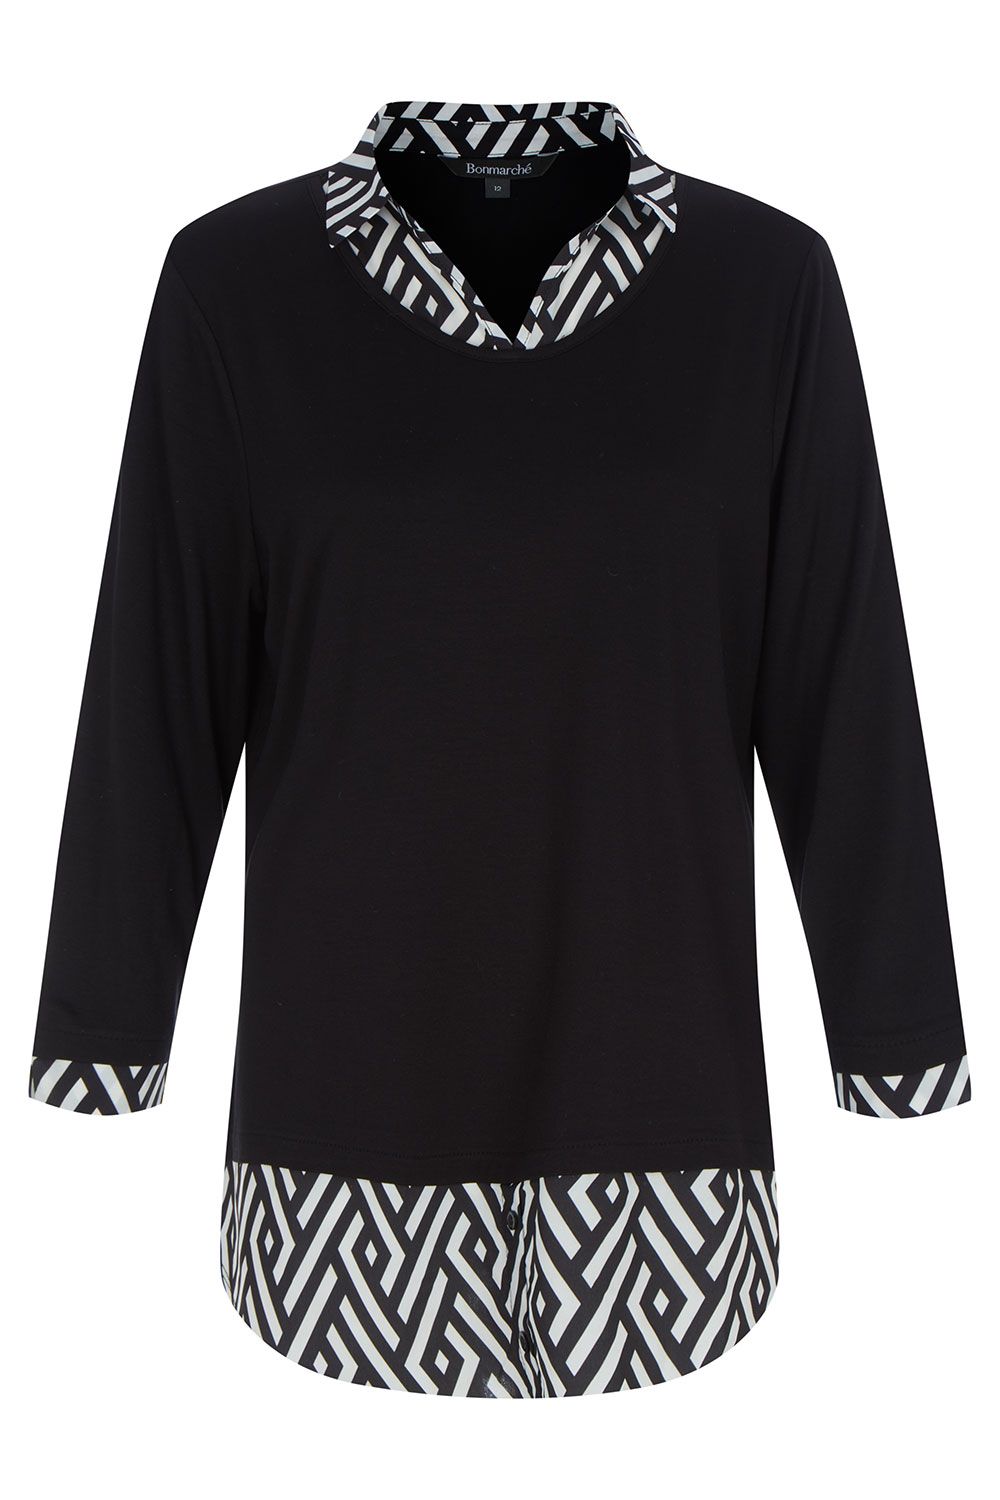 Long Sleeve 2 in 1 Top with Geo Print Collar | Bonmarché